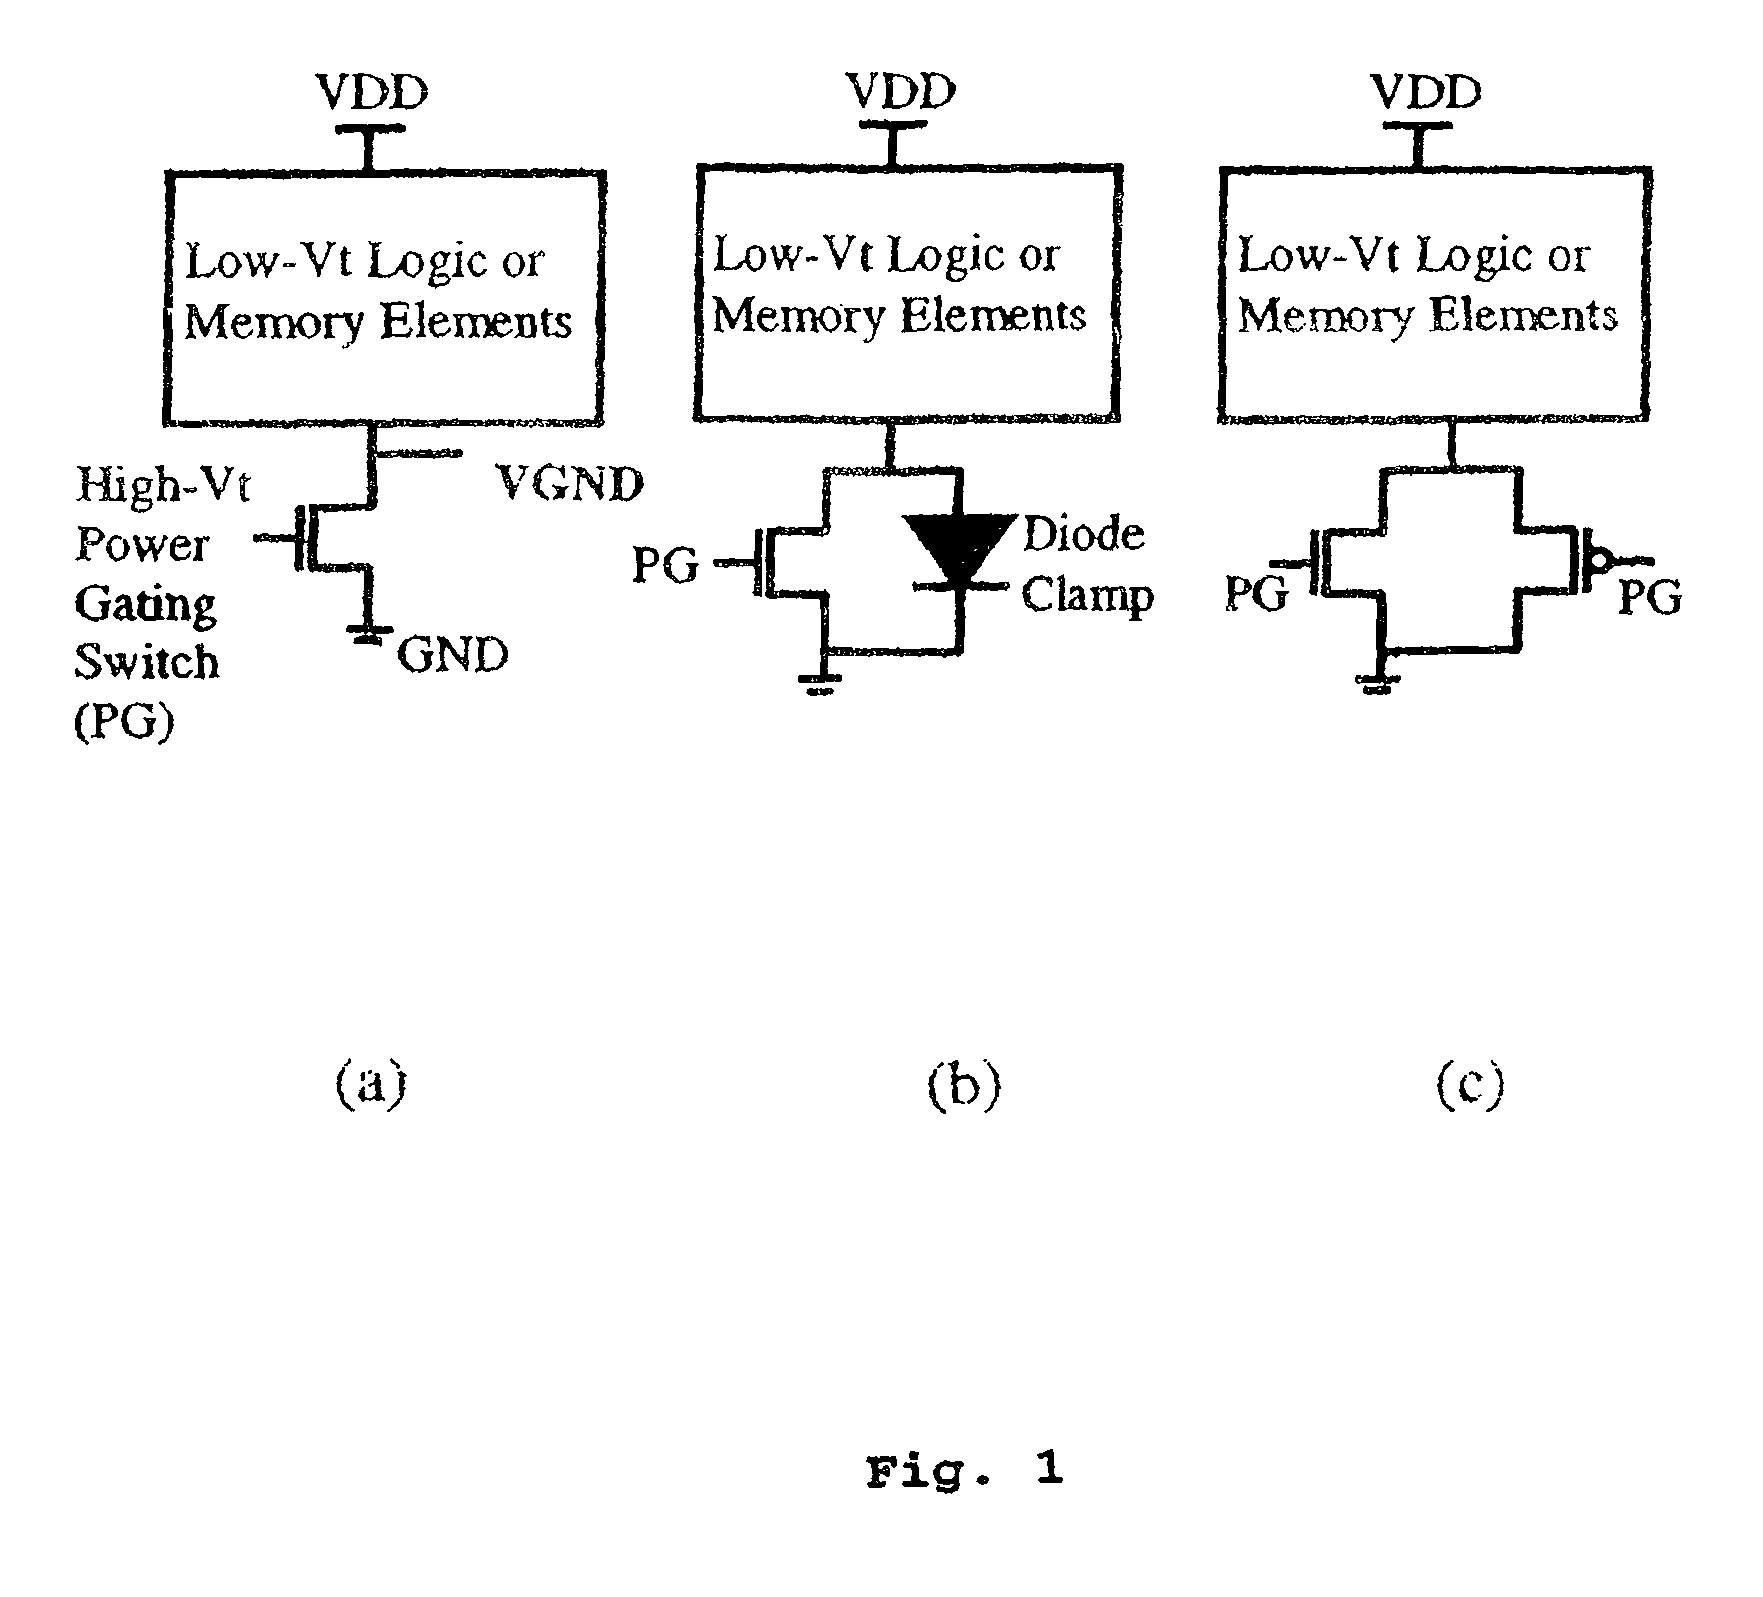 High-density low-power data retention power gating with double-gate devices